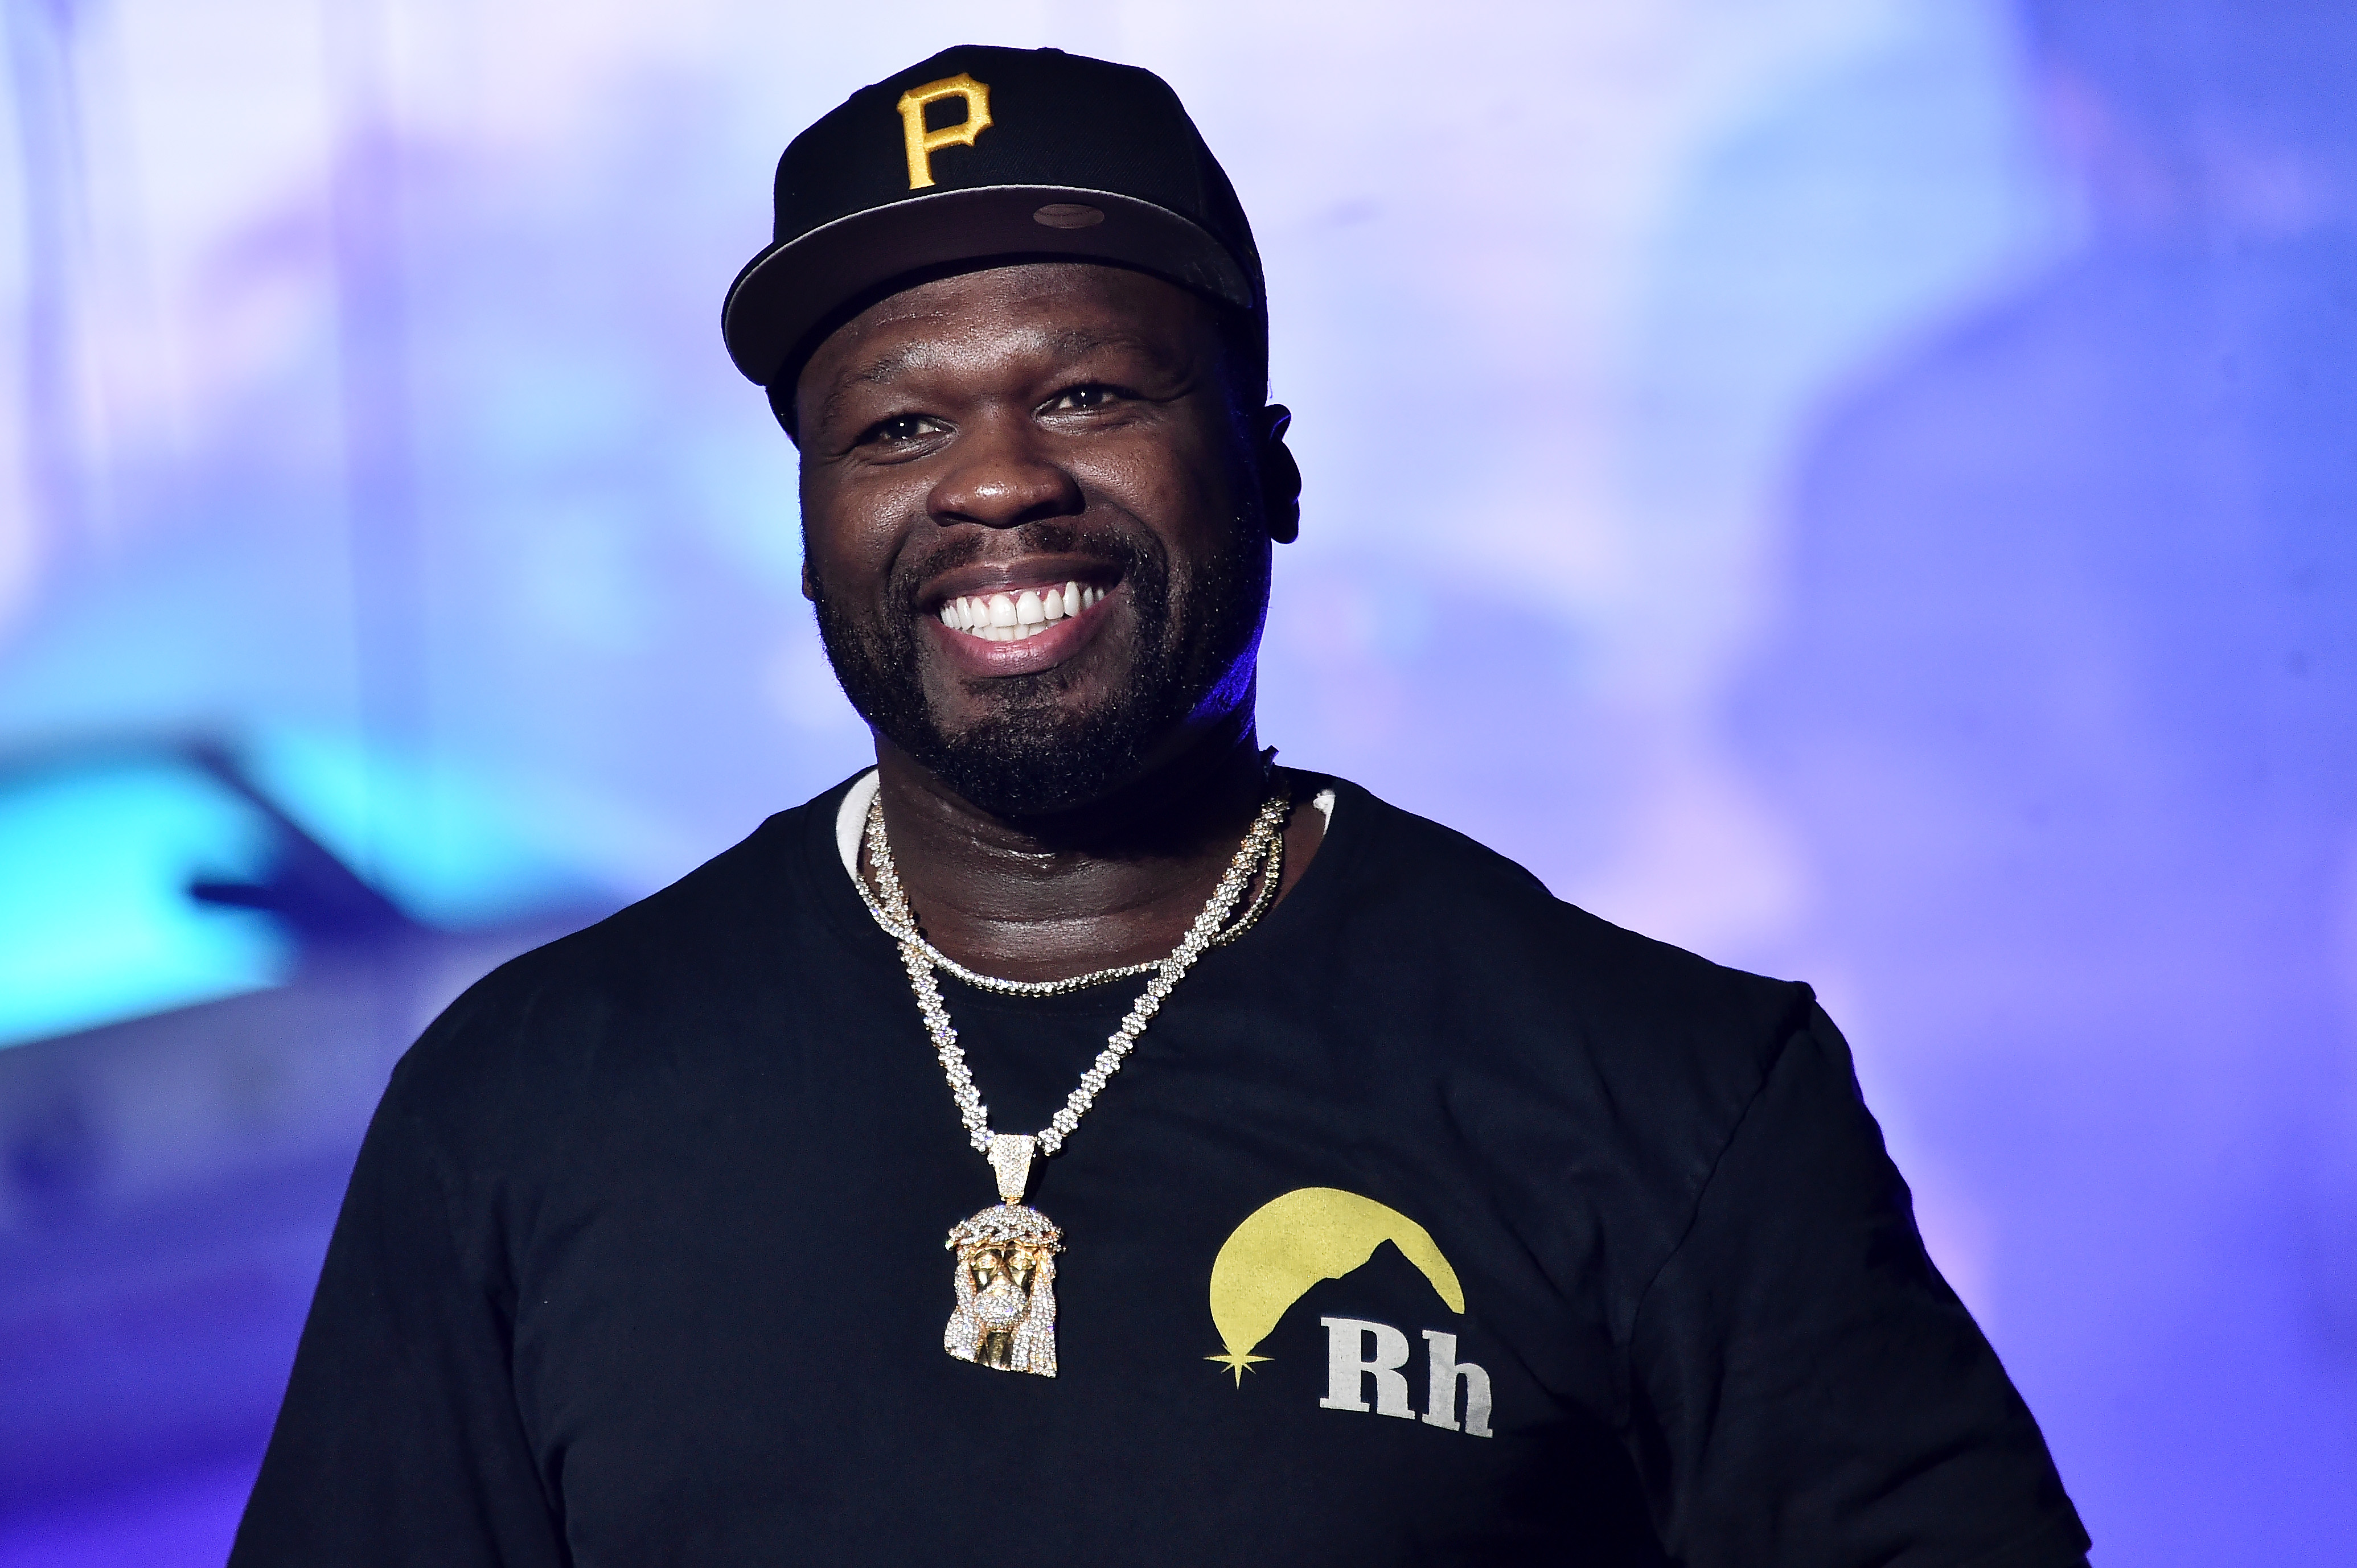 50 Cent performs live during Rolling Loud music festival at Citi Field on October 13, 2019, in New York City. | Source: Getty Images